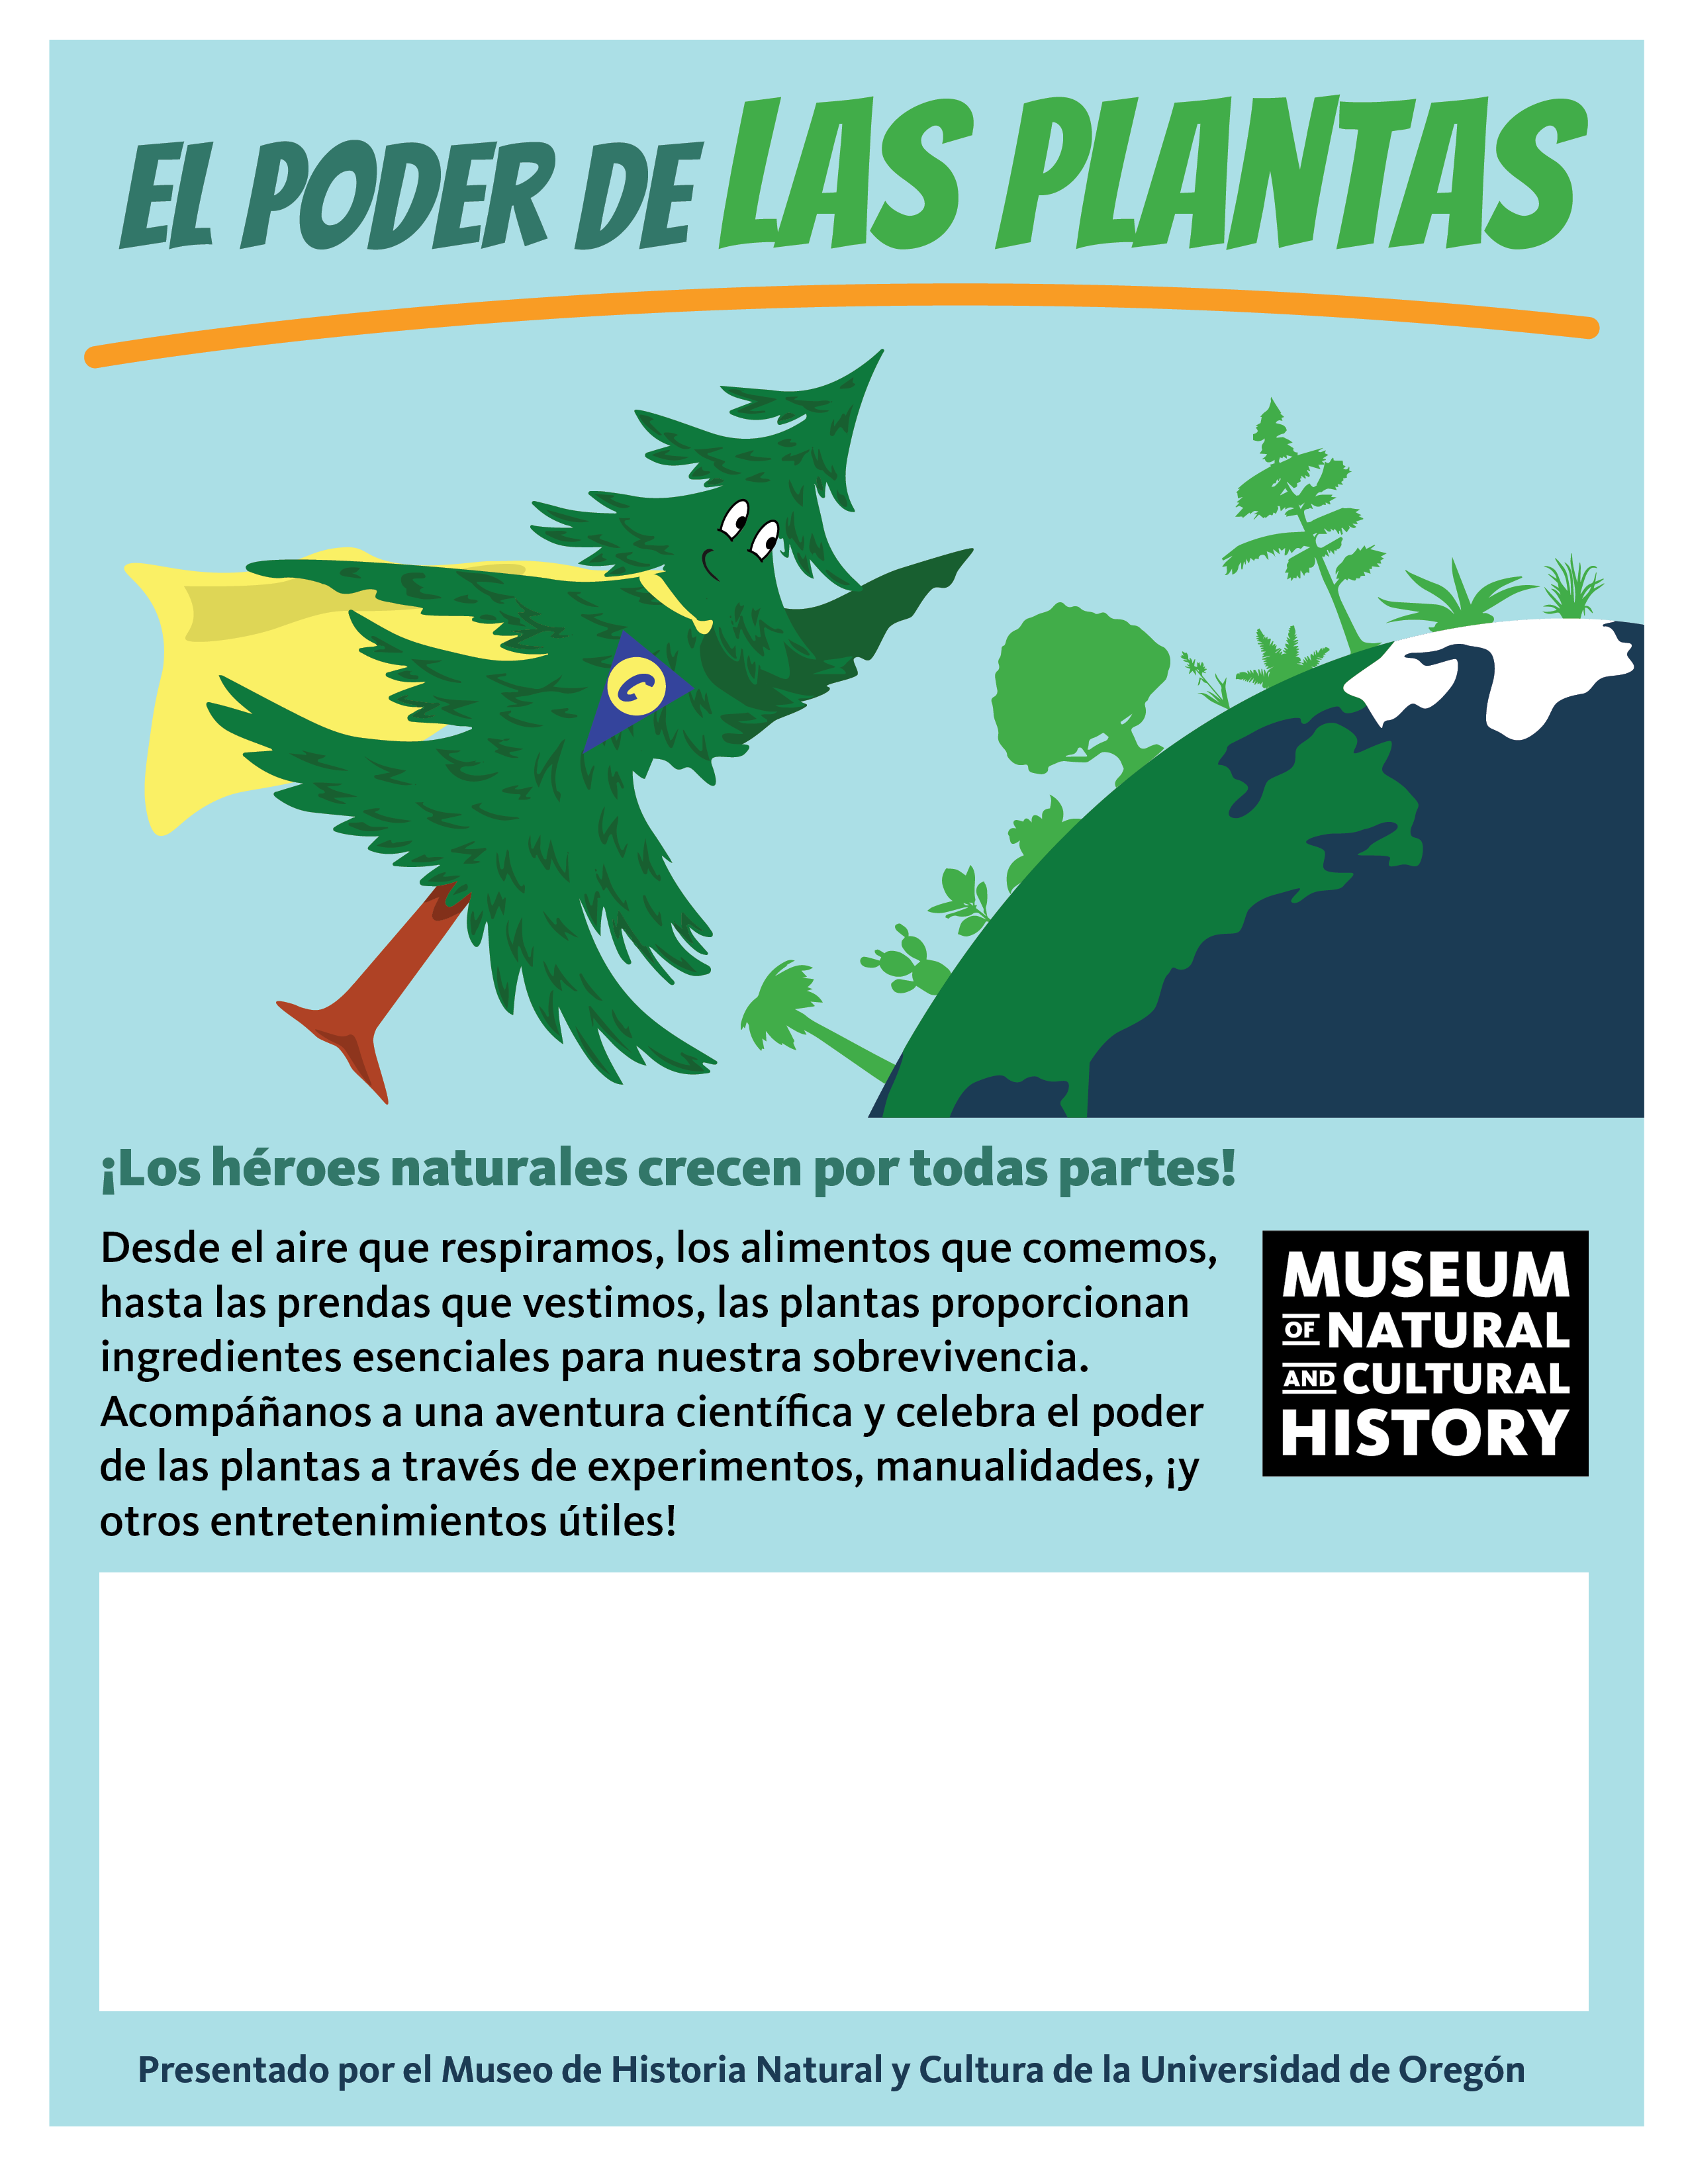 An illustration of a tree as a superhero in a cape flying over the Earth, with the title EL PODER DE LAS PLANTAS appearing overhead, and a blank space for program details beneath the title Oregon's Dino-Story and bove a blank space for program details